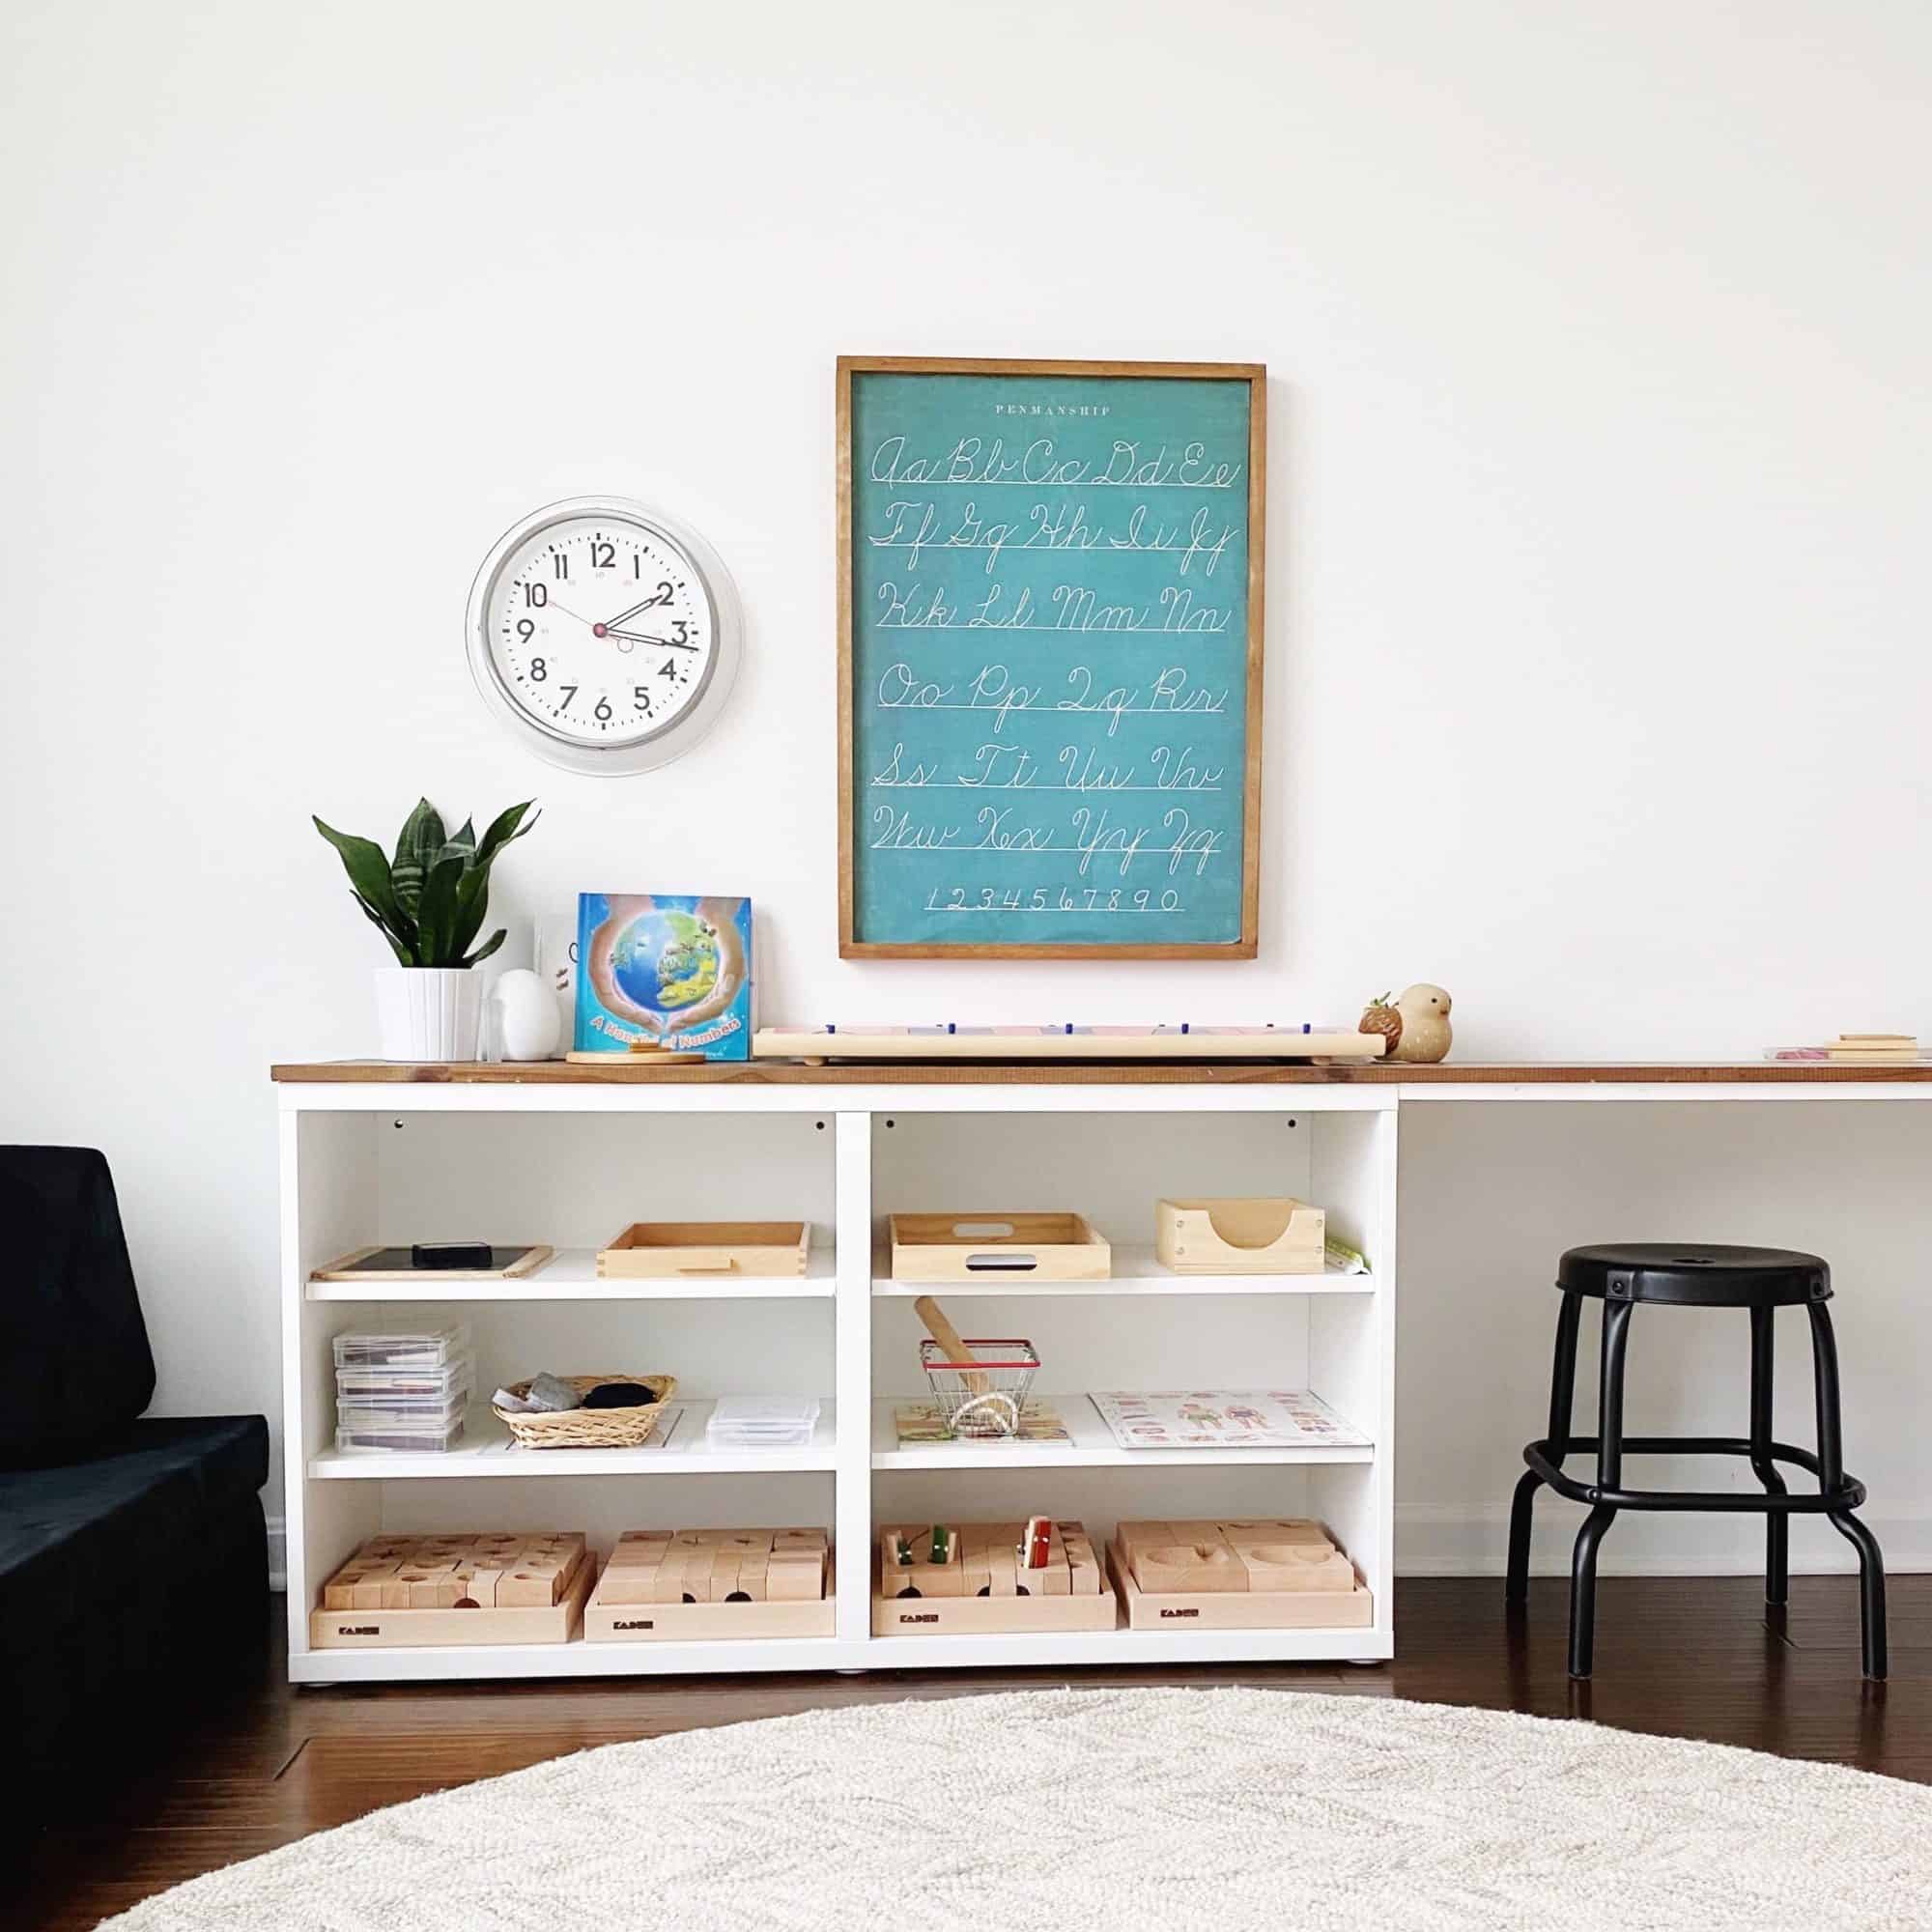 Tour a Montessori-inspired schoolroom + playroom for multiple children at www.freeandunfettered.com. You can also download a free guide to help you design your own prepared environment for your children at home. #montessori #designingspacesforchildren #preparedenvironment #montessoriathome #homeschoolroom #homeschooling